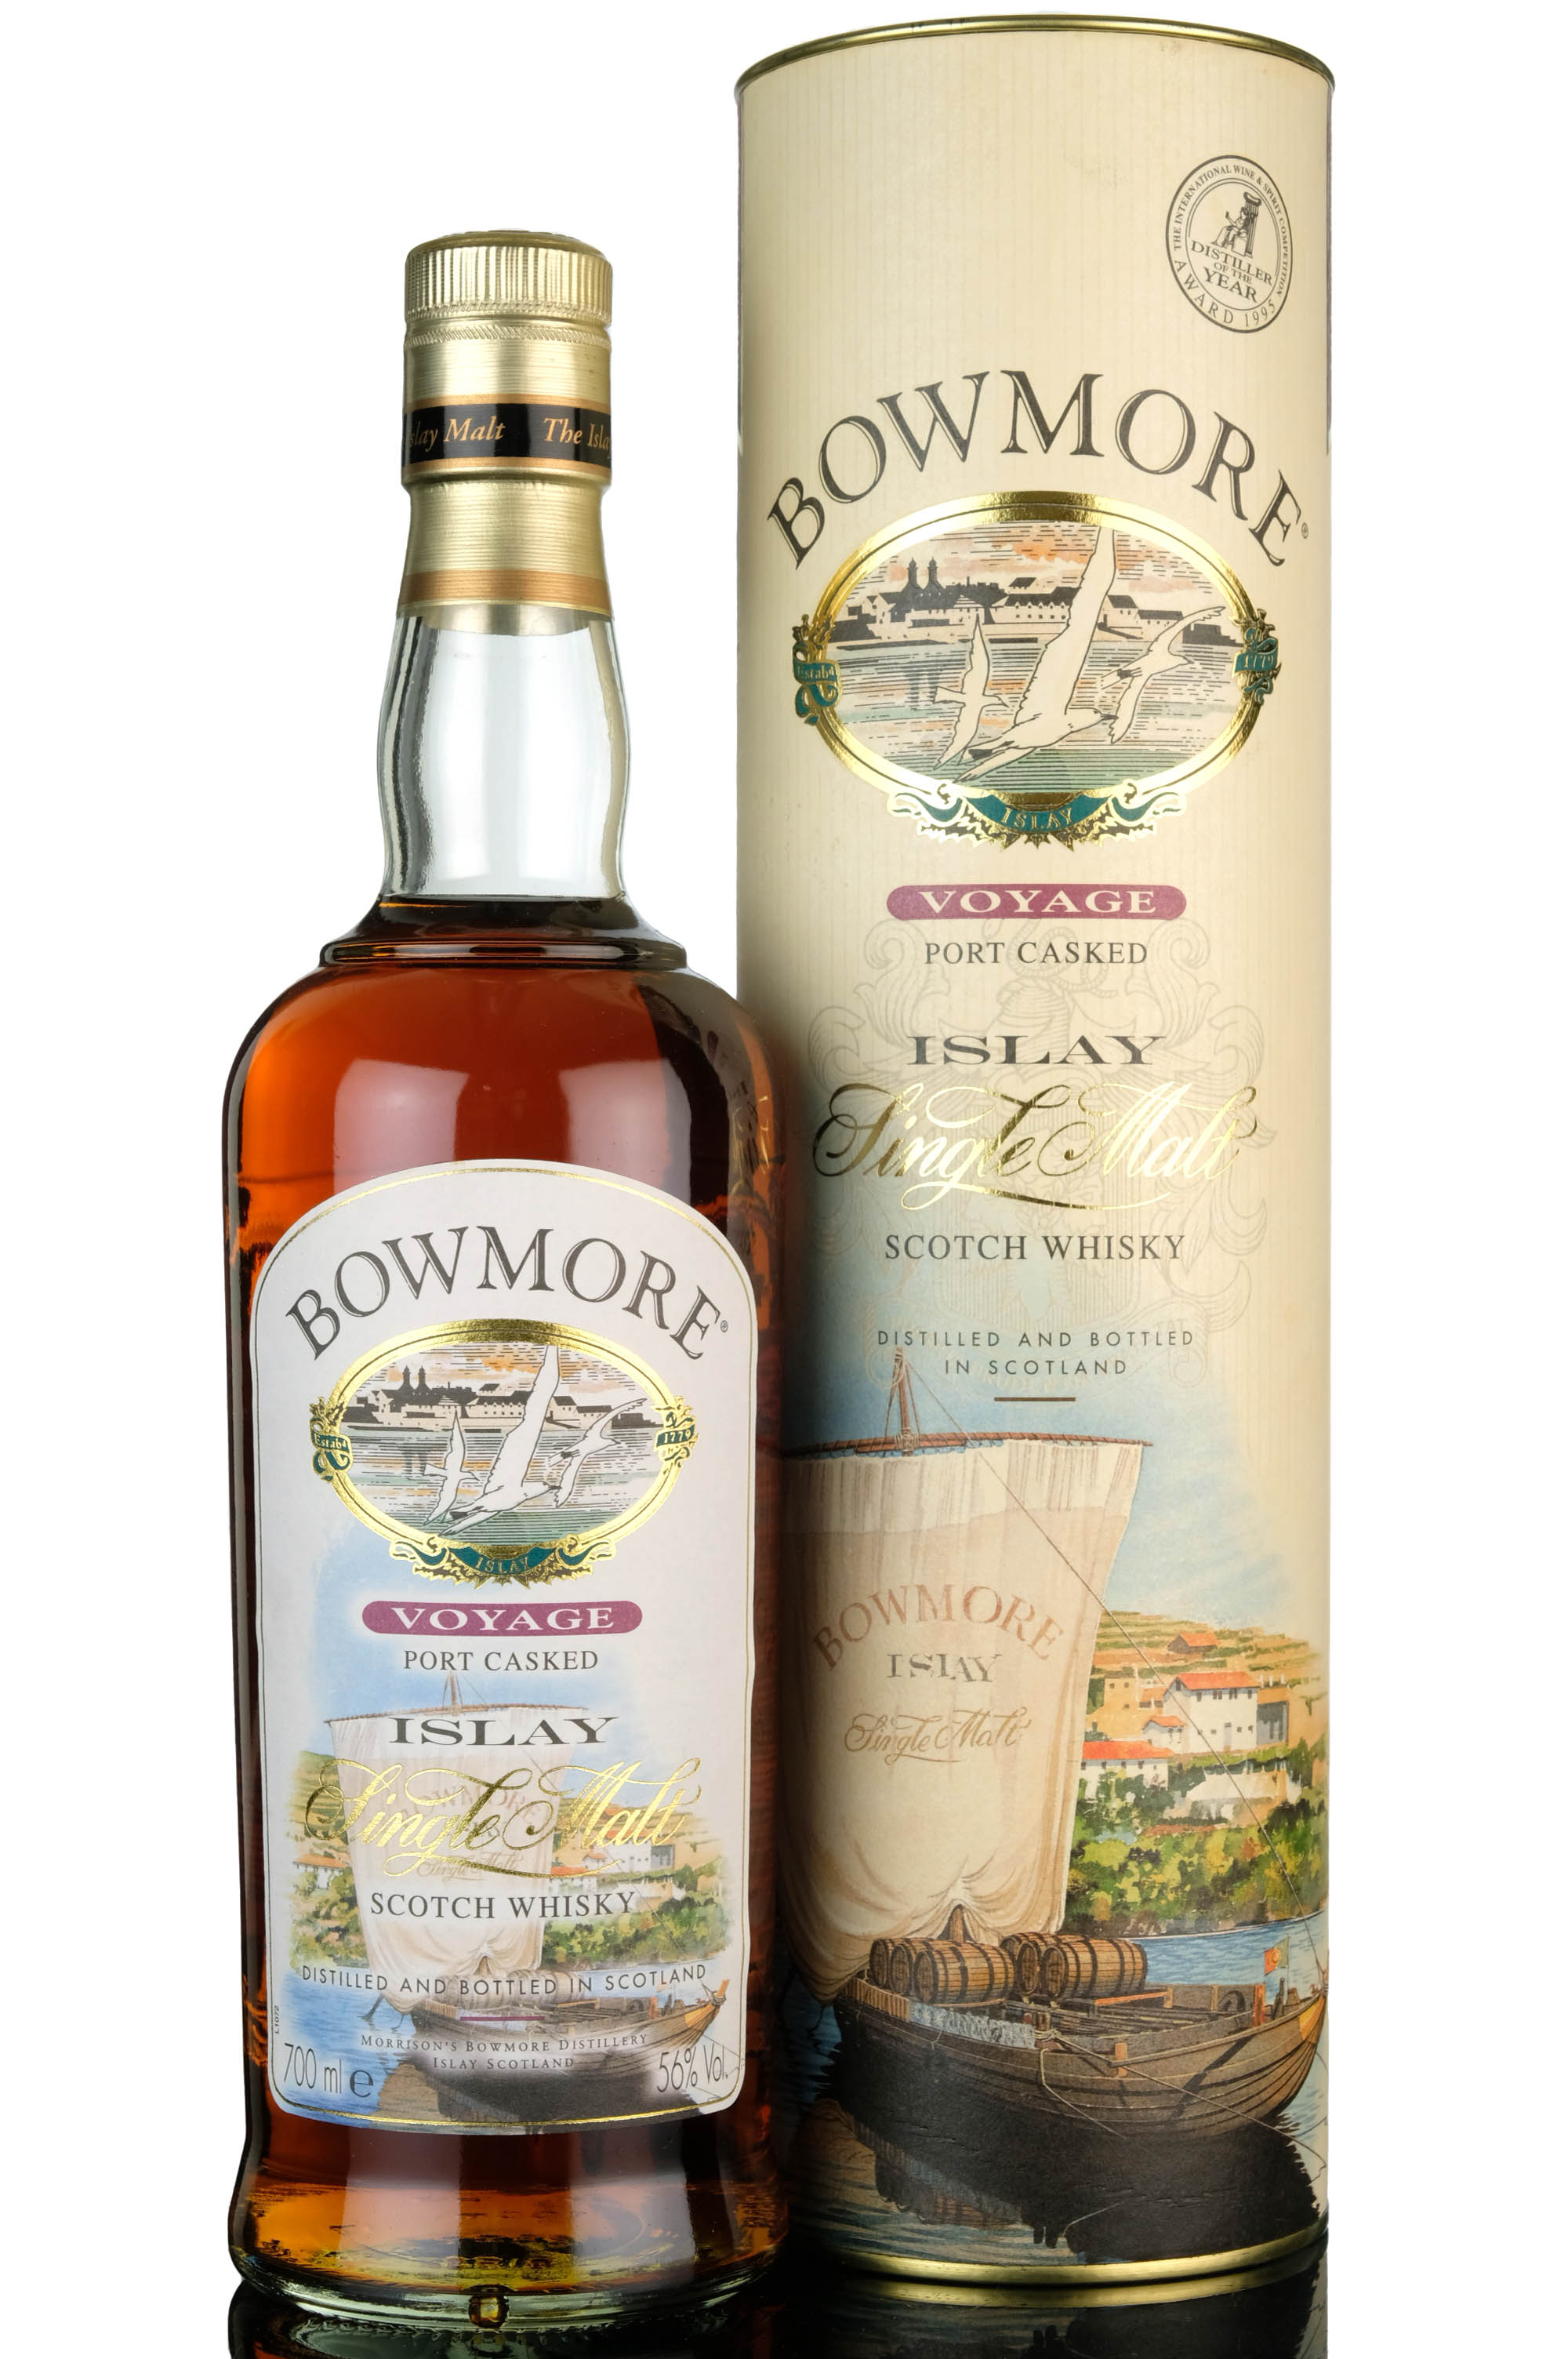 Bowmore Voyage - Ruby Port Cask Finish - 2000 Release